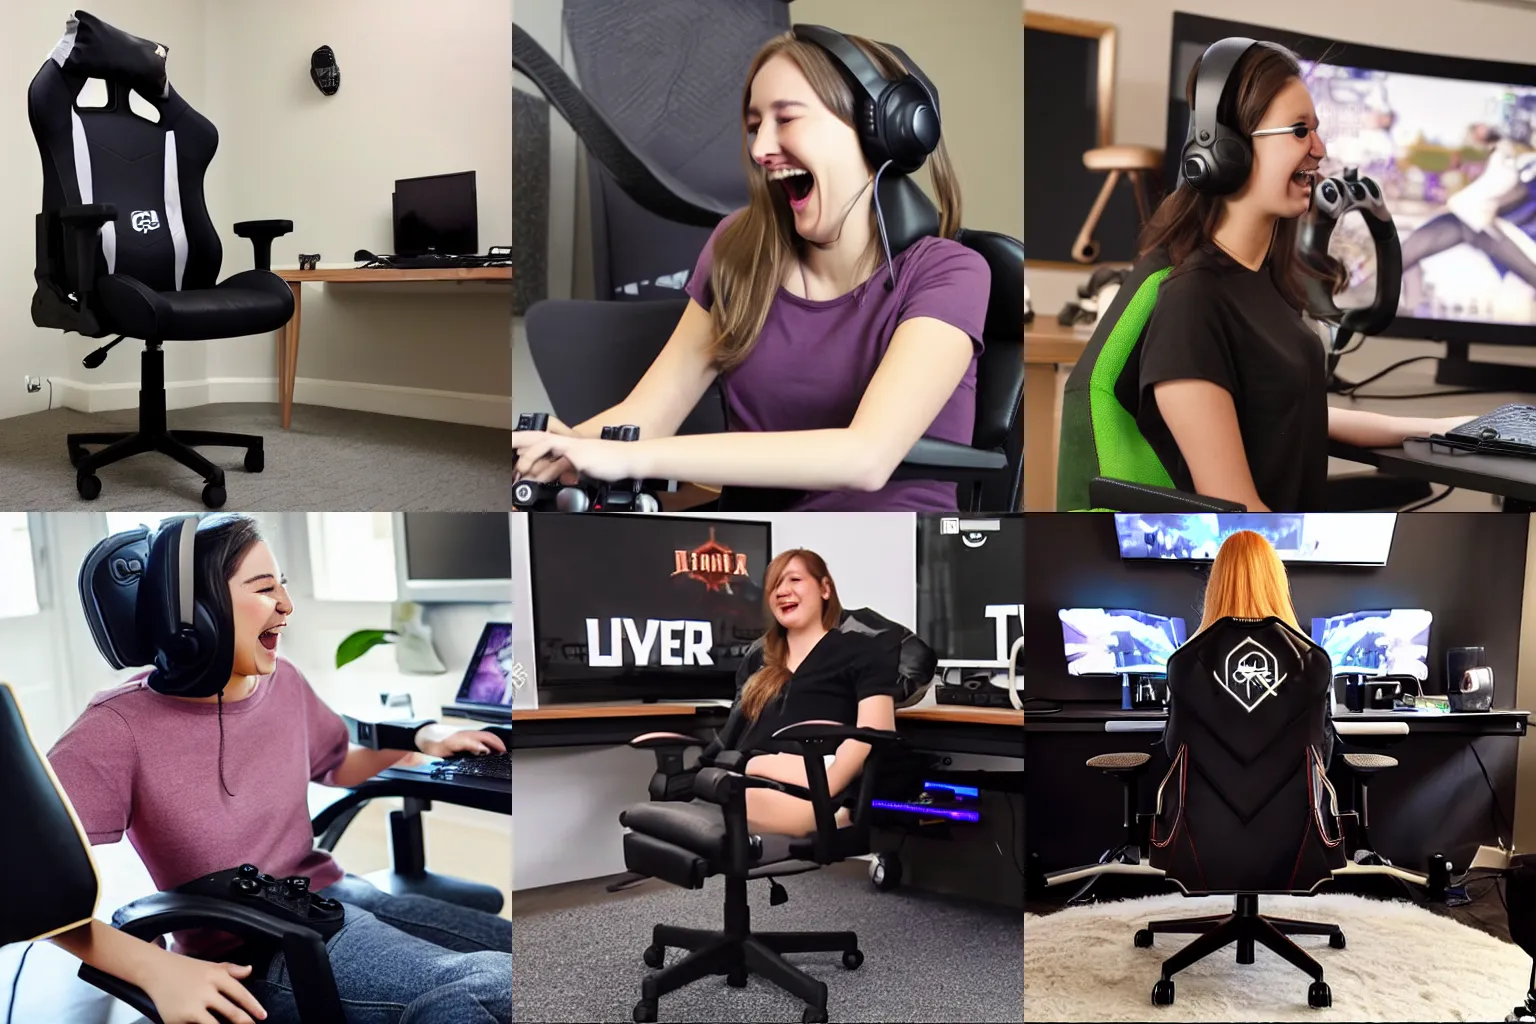 Prompt: egirl sitting on her gaming chair laughs on Twitch stream